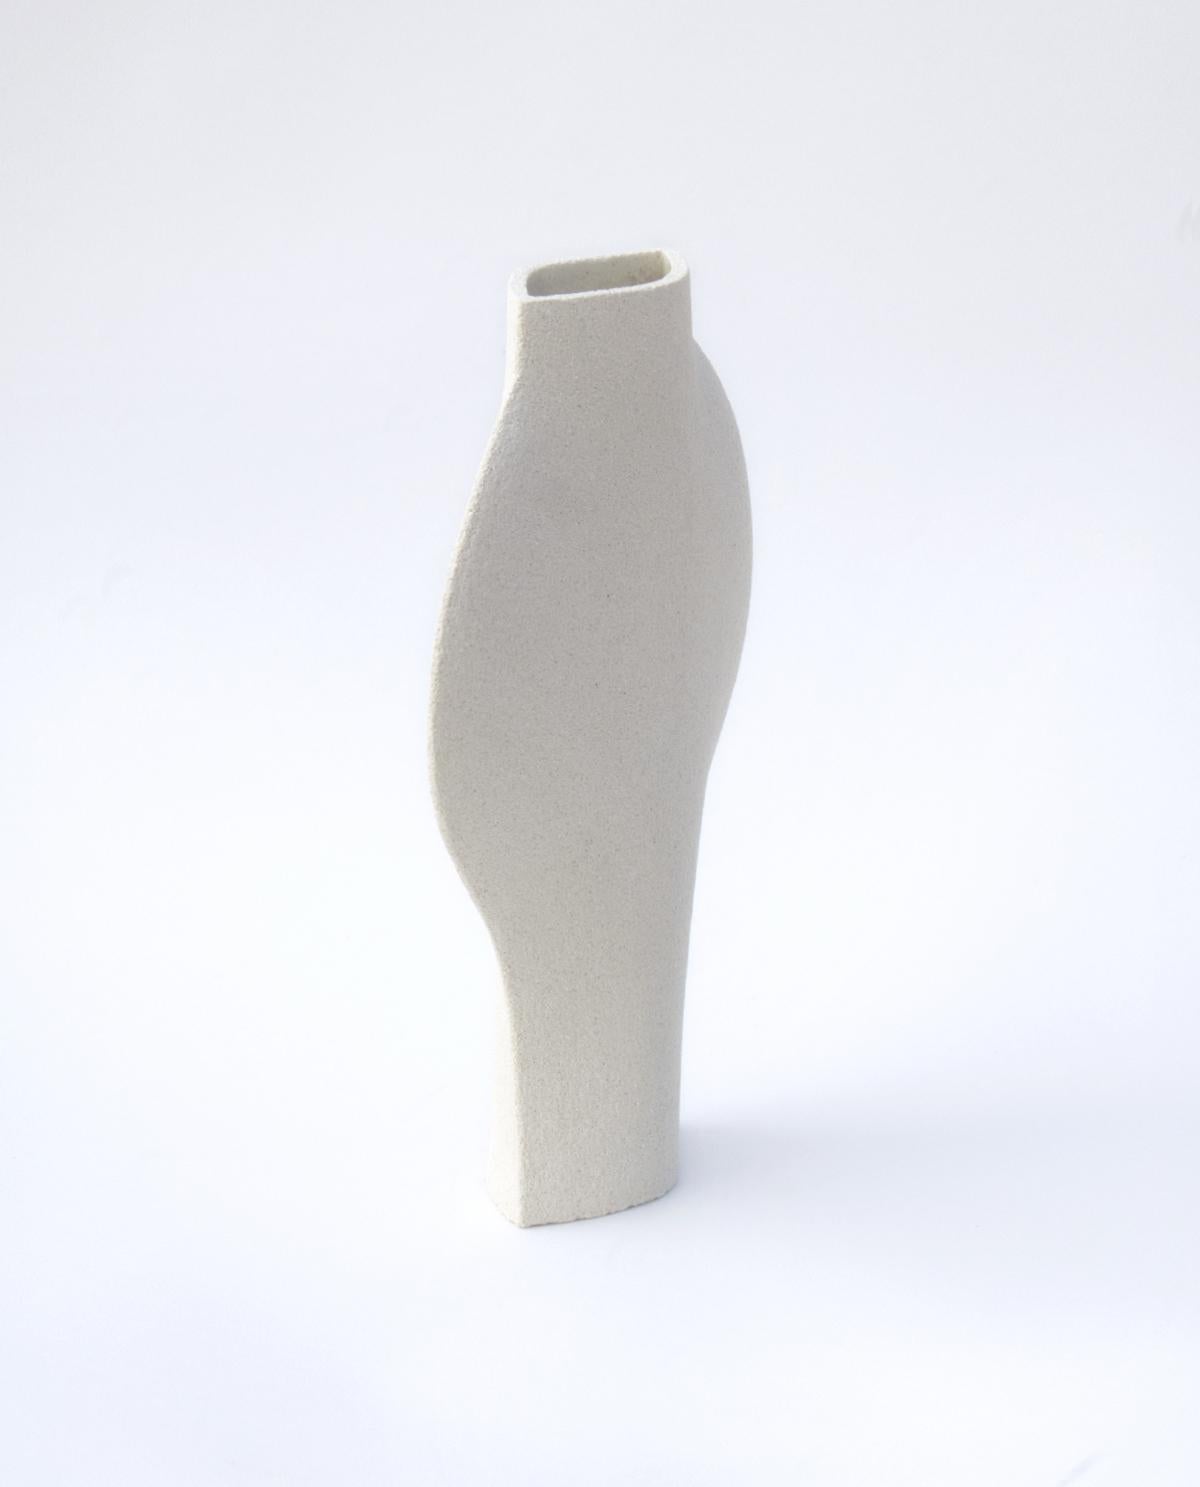 ‘Dal - White’ ceramic vase

Measures: H: 25 cm / L: 20 cm
H: 10 inch. / L: 8 inch.

- Stoneware fired at high temperature finished with transparent glossy glaze inside.
- Raw exterior showcasing the natural aspect of the clay’s texture.
-